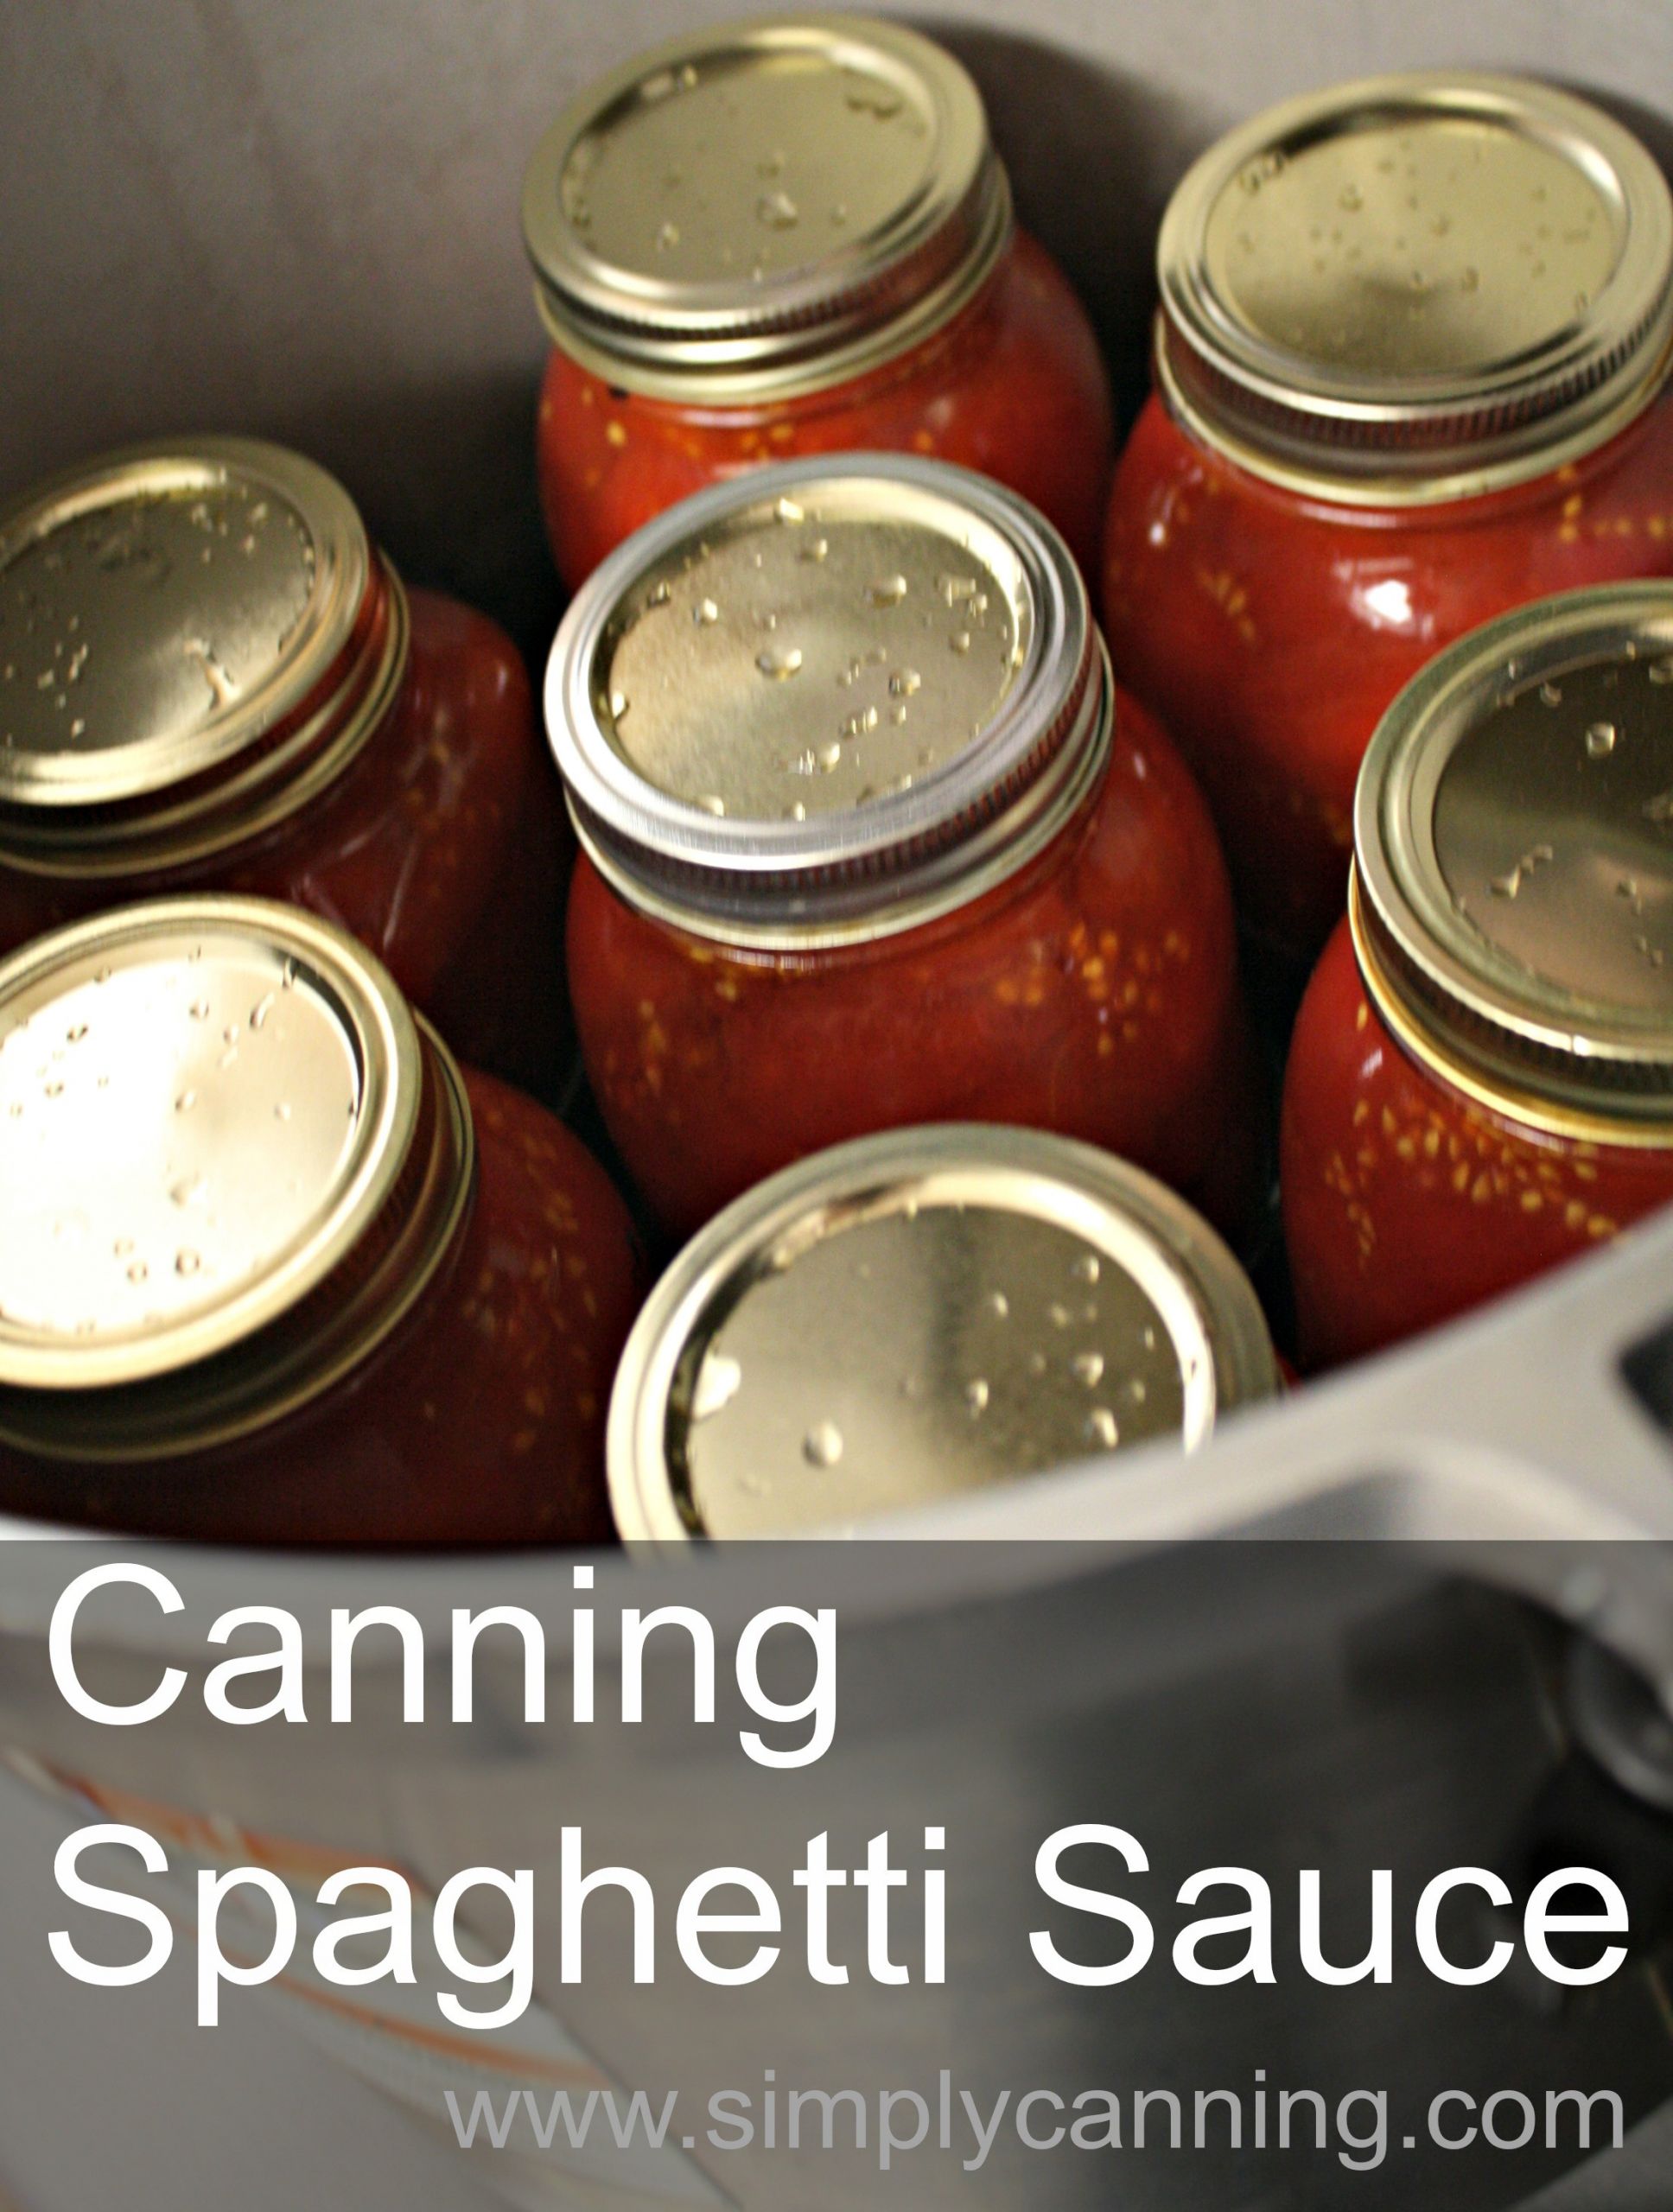 Spaghetti Sauce For Canning
 Canning Spaghetti Sauce Recipe with meat that will save